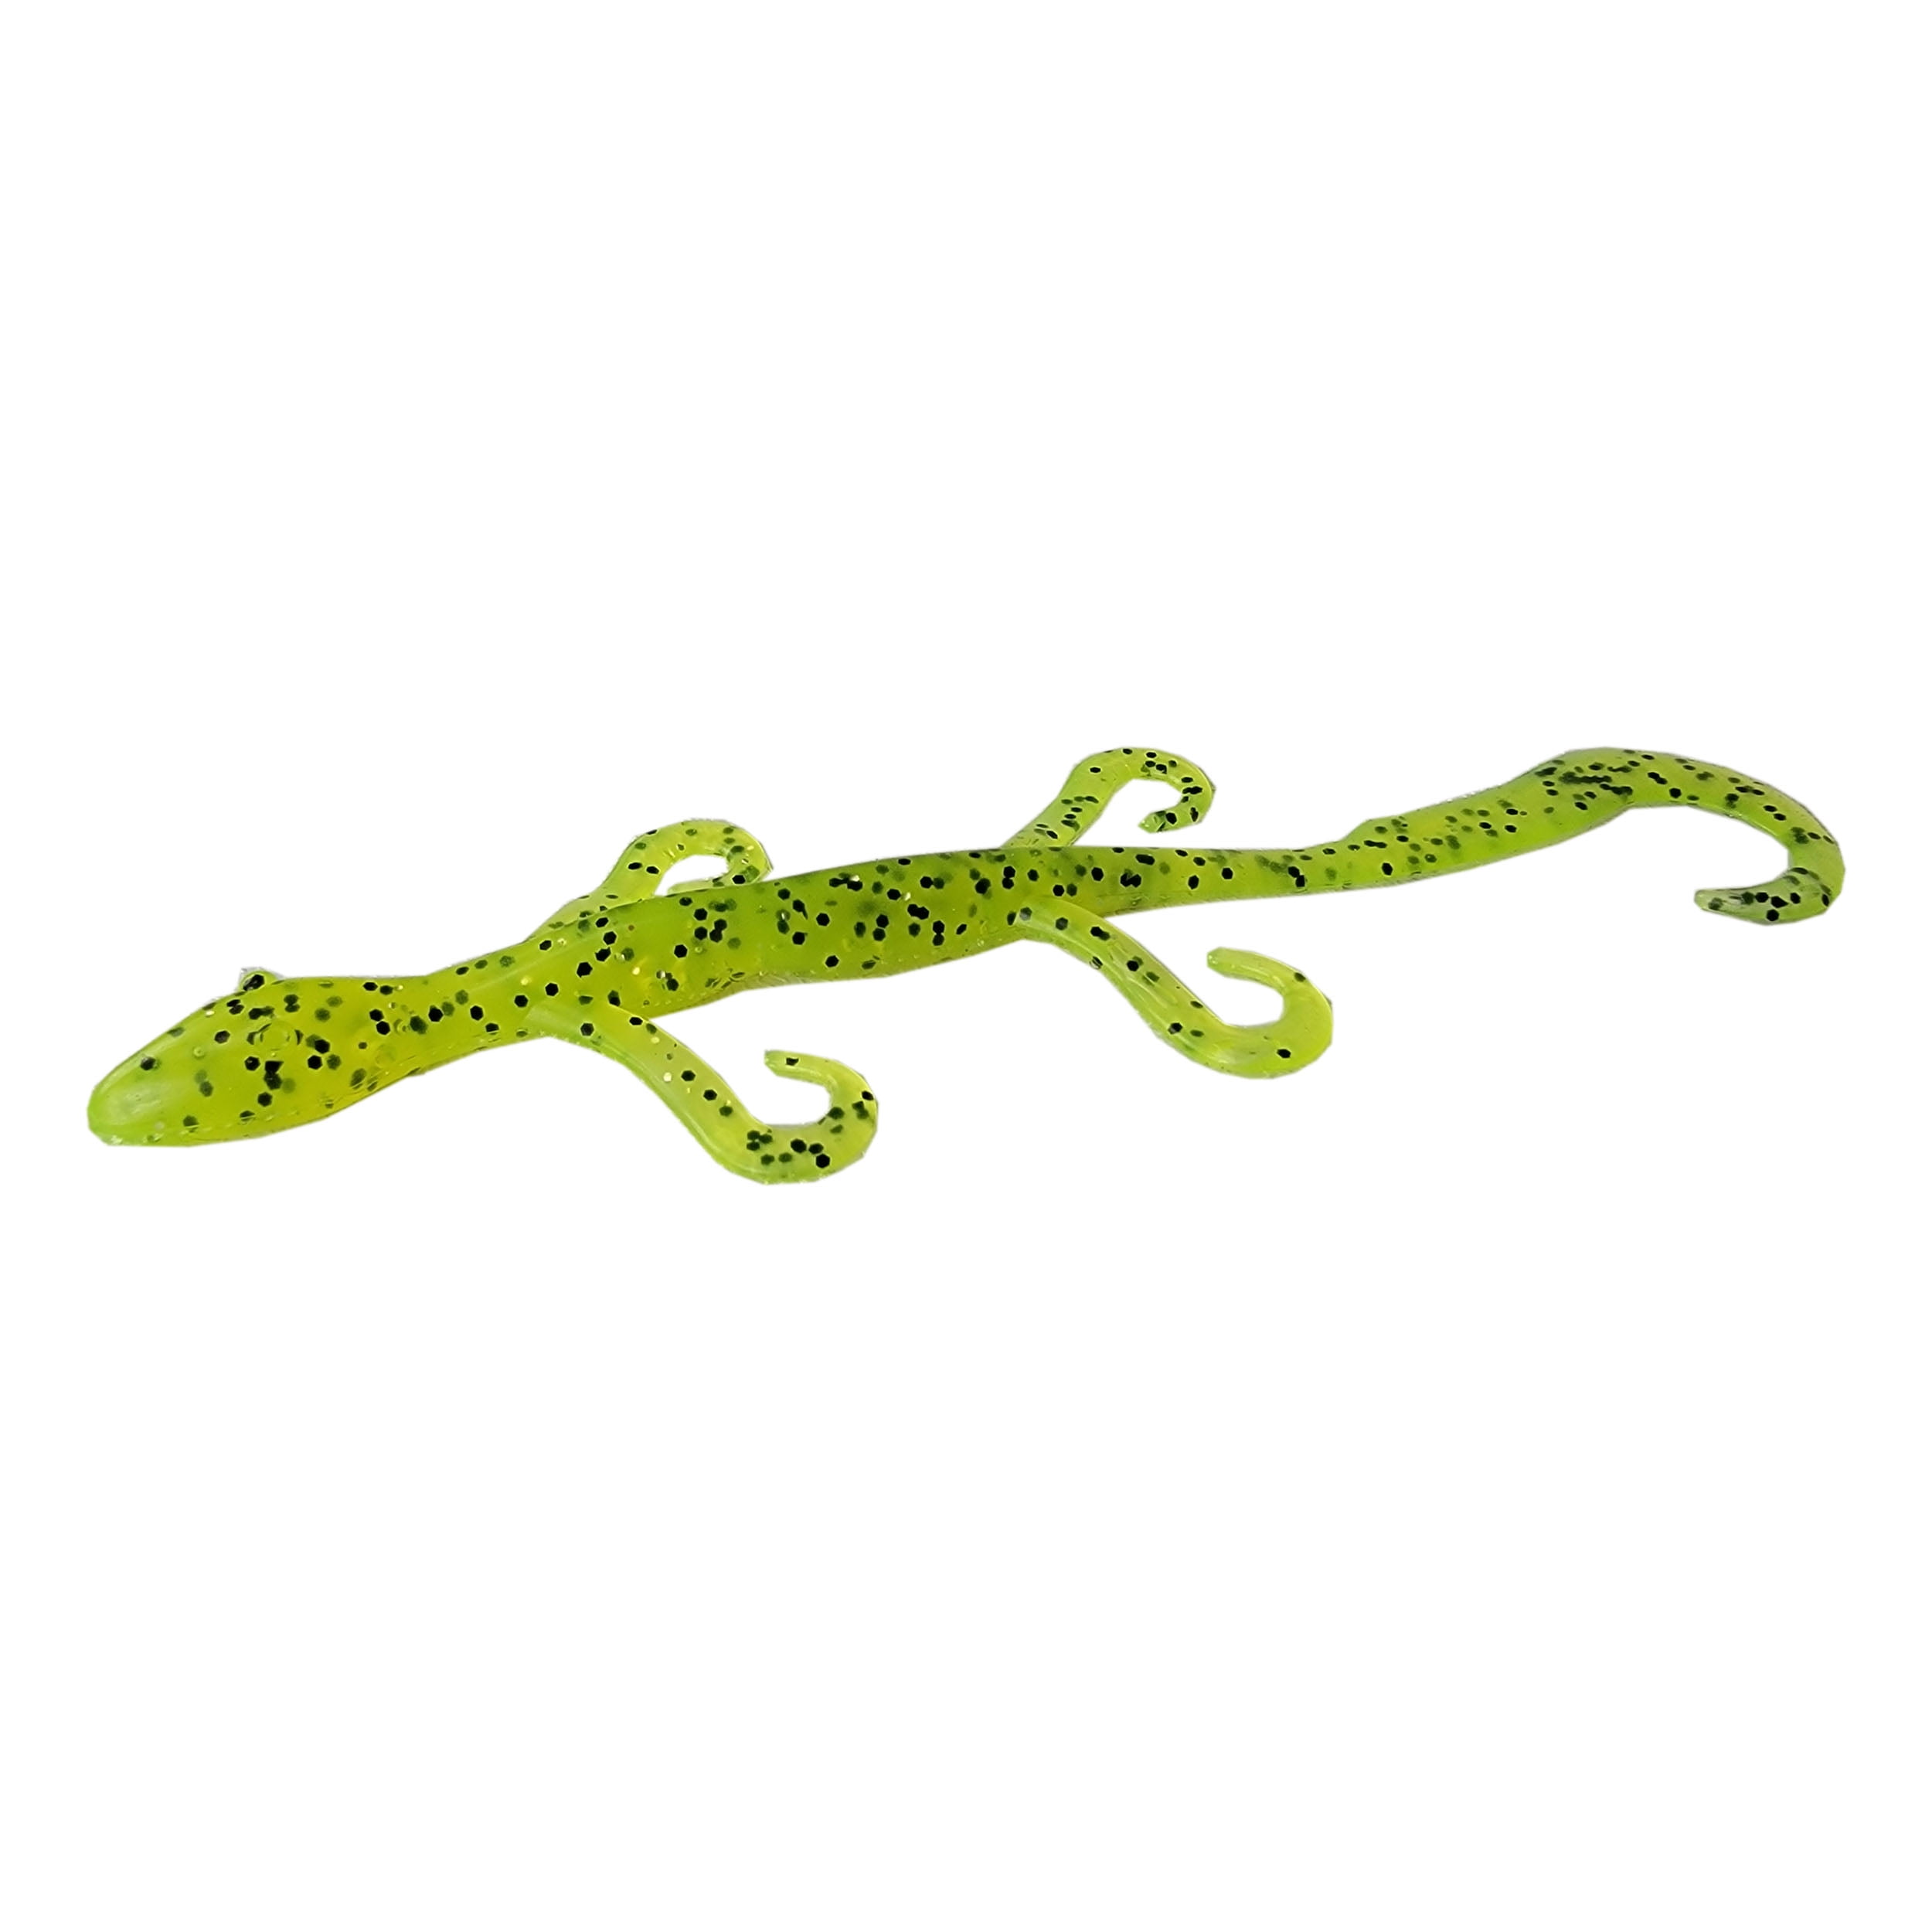 Tackle HD 12-Pack Lizard Fishing Lure, 6-Inch Soft Plastic Fishing Lures  for Bass Fishing, Bass Lures with Massive Curly Tail, Freshwater Lizard  Fishing Bait, Chartreuse Pepper 